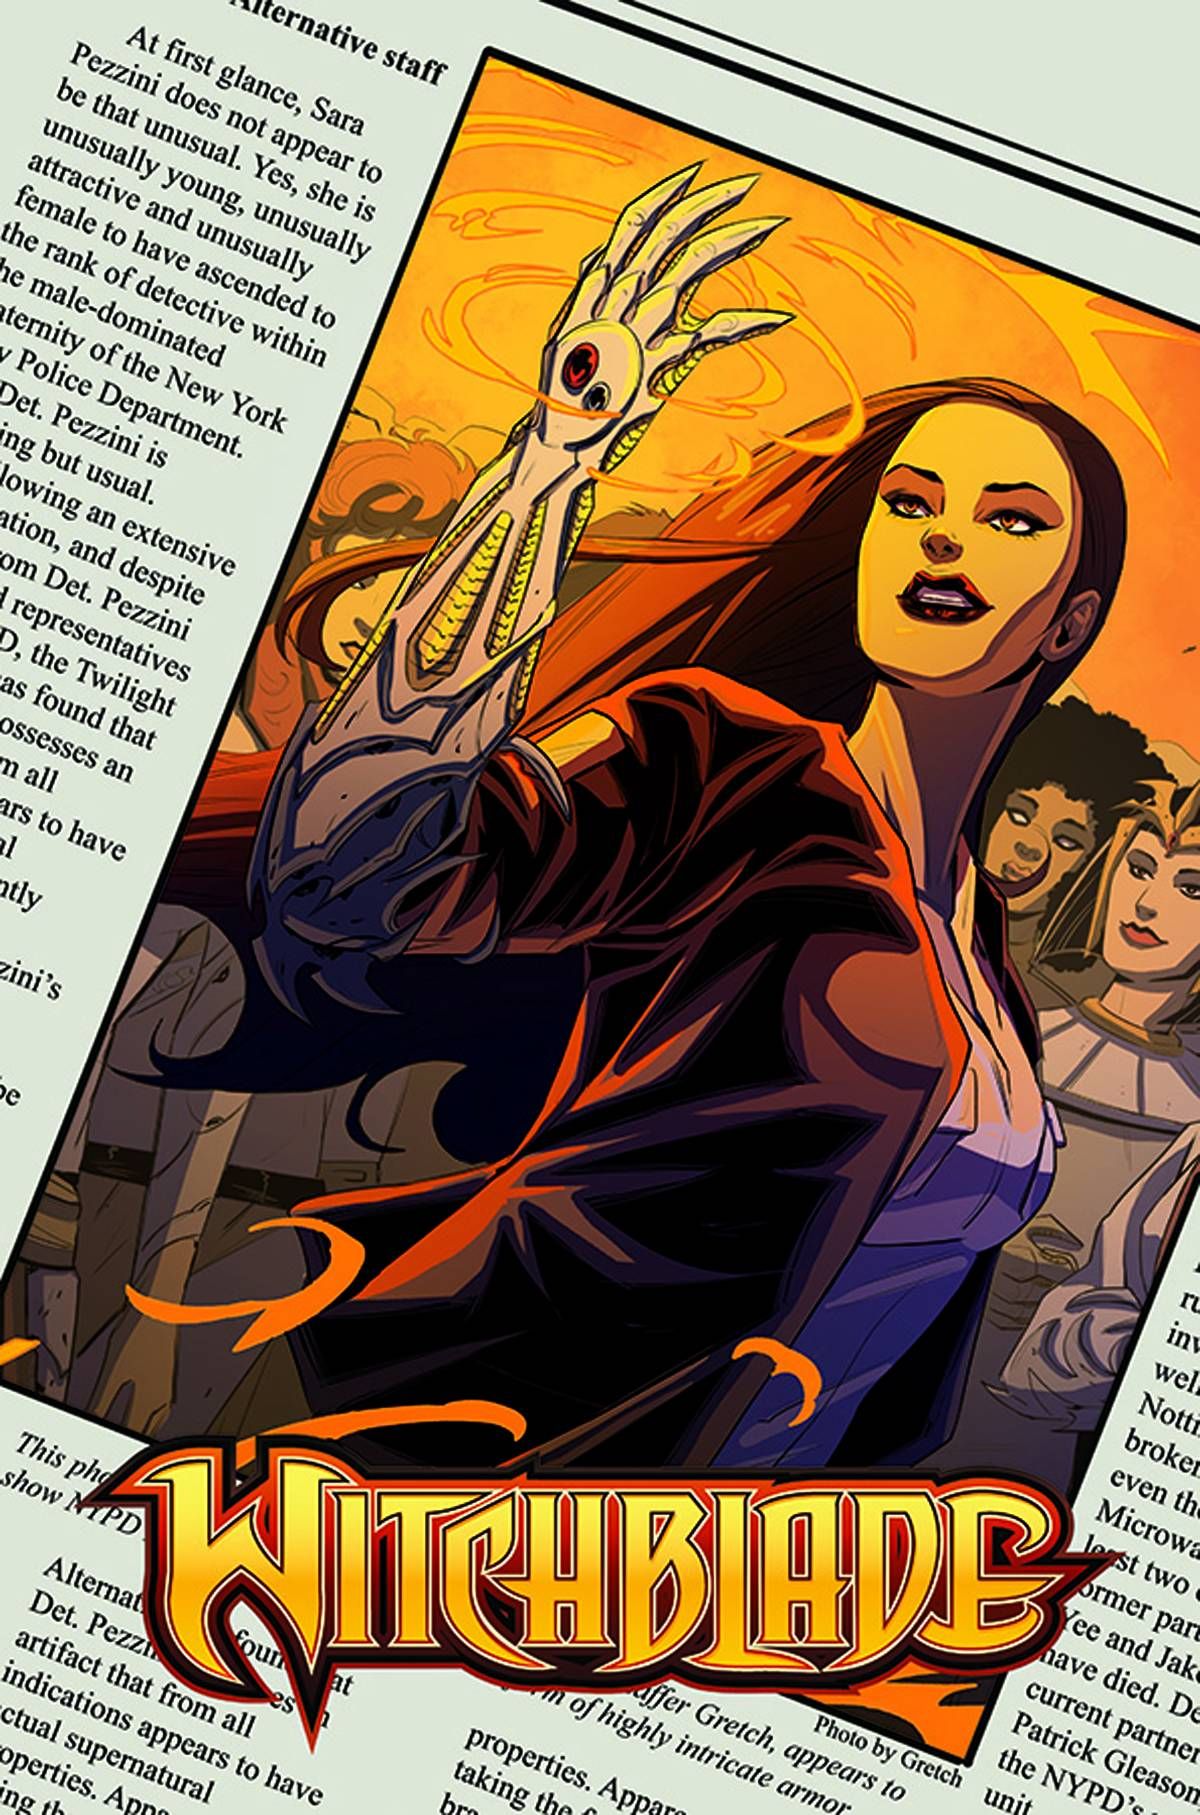 Witchblade Case Files Comic